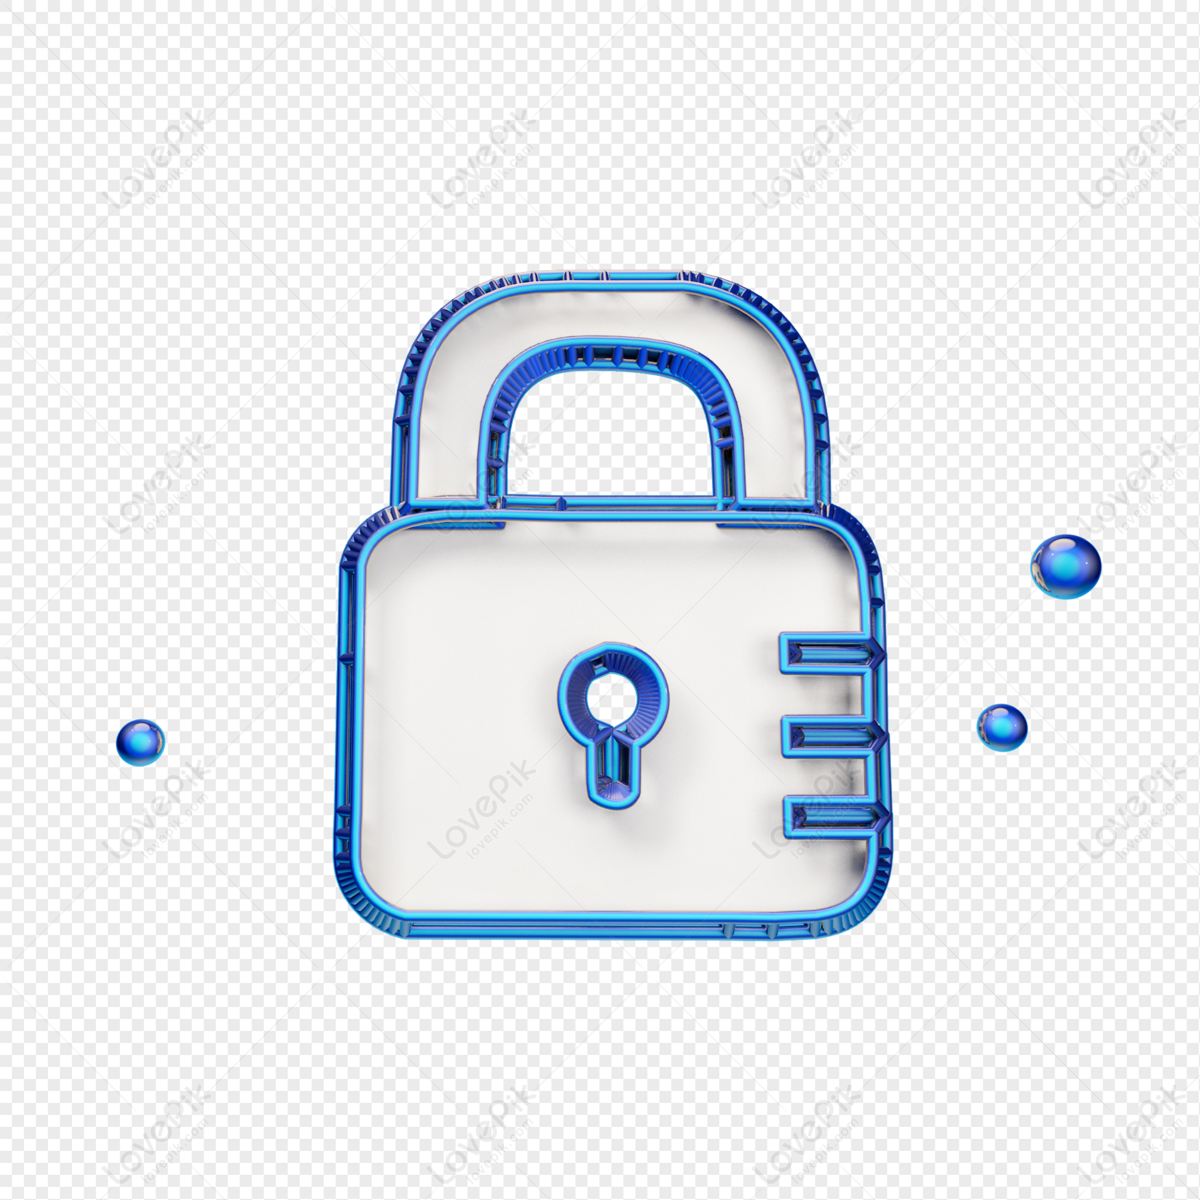 Blue Creative Lock Icon PNG Transparent Image And Clipart Image For Free  Download - Lovepik | 401156767